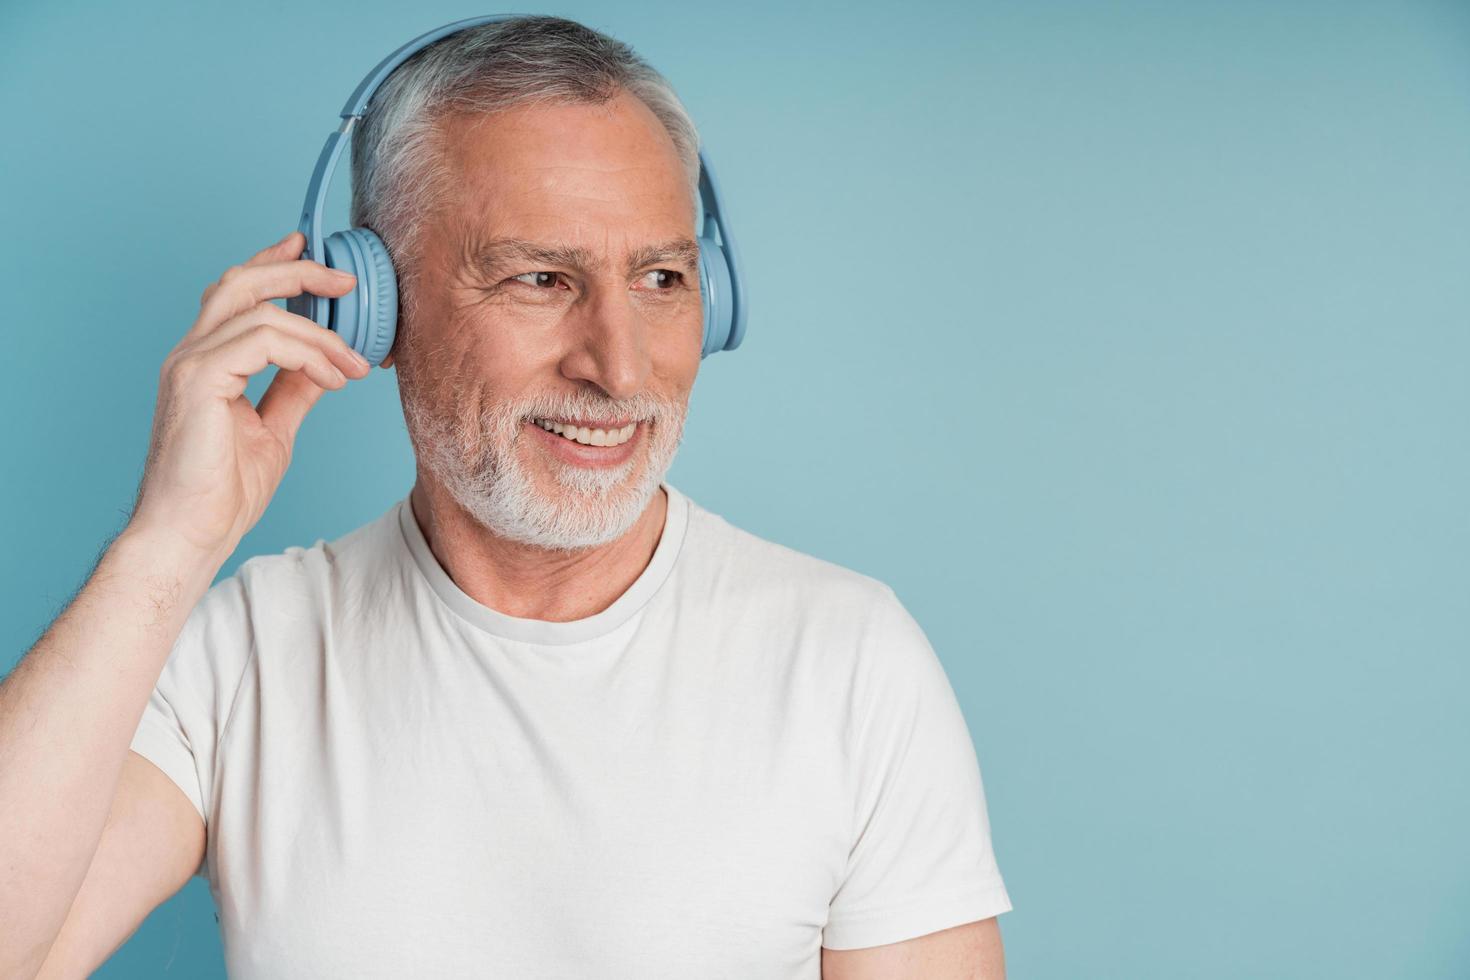 Attractive, smiling man in headphones posing on a blue background photo